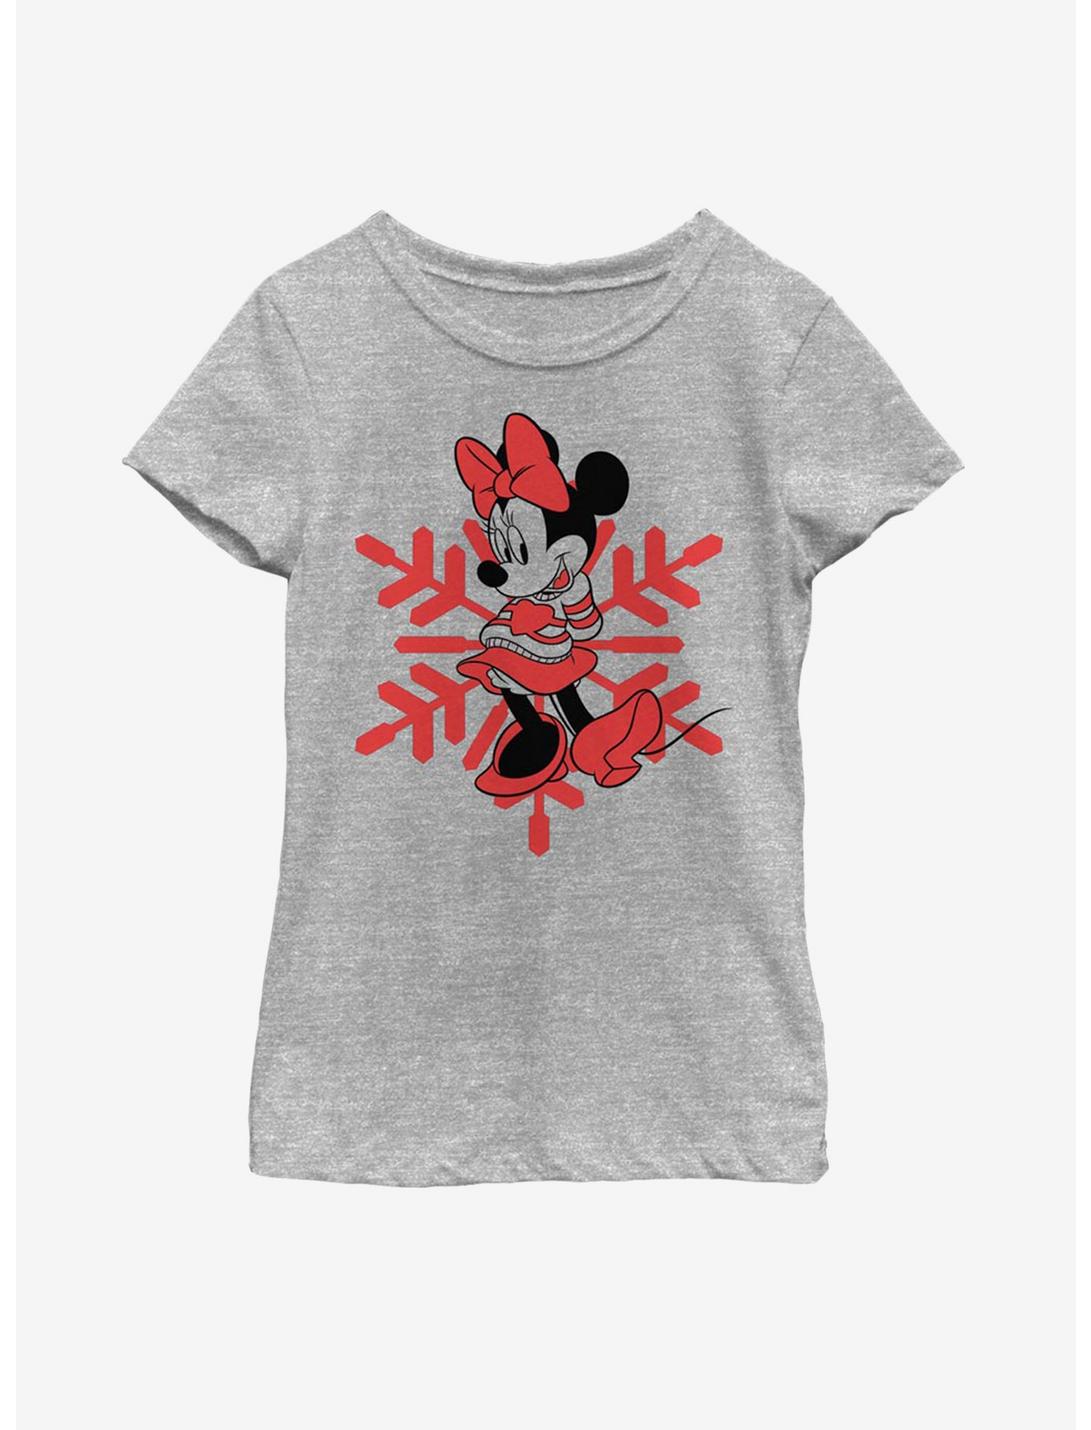 Disney Mickey Mouse Minnie Snowflake Youth Girls T-Shirt, ATH HTR, hi-res